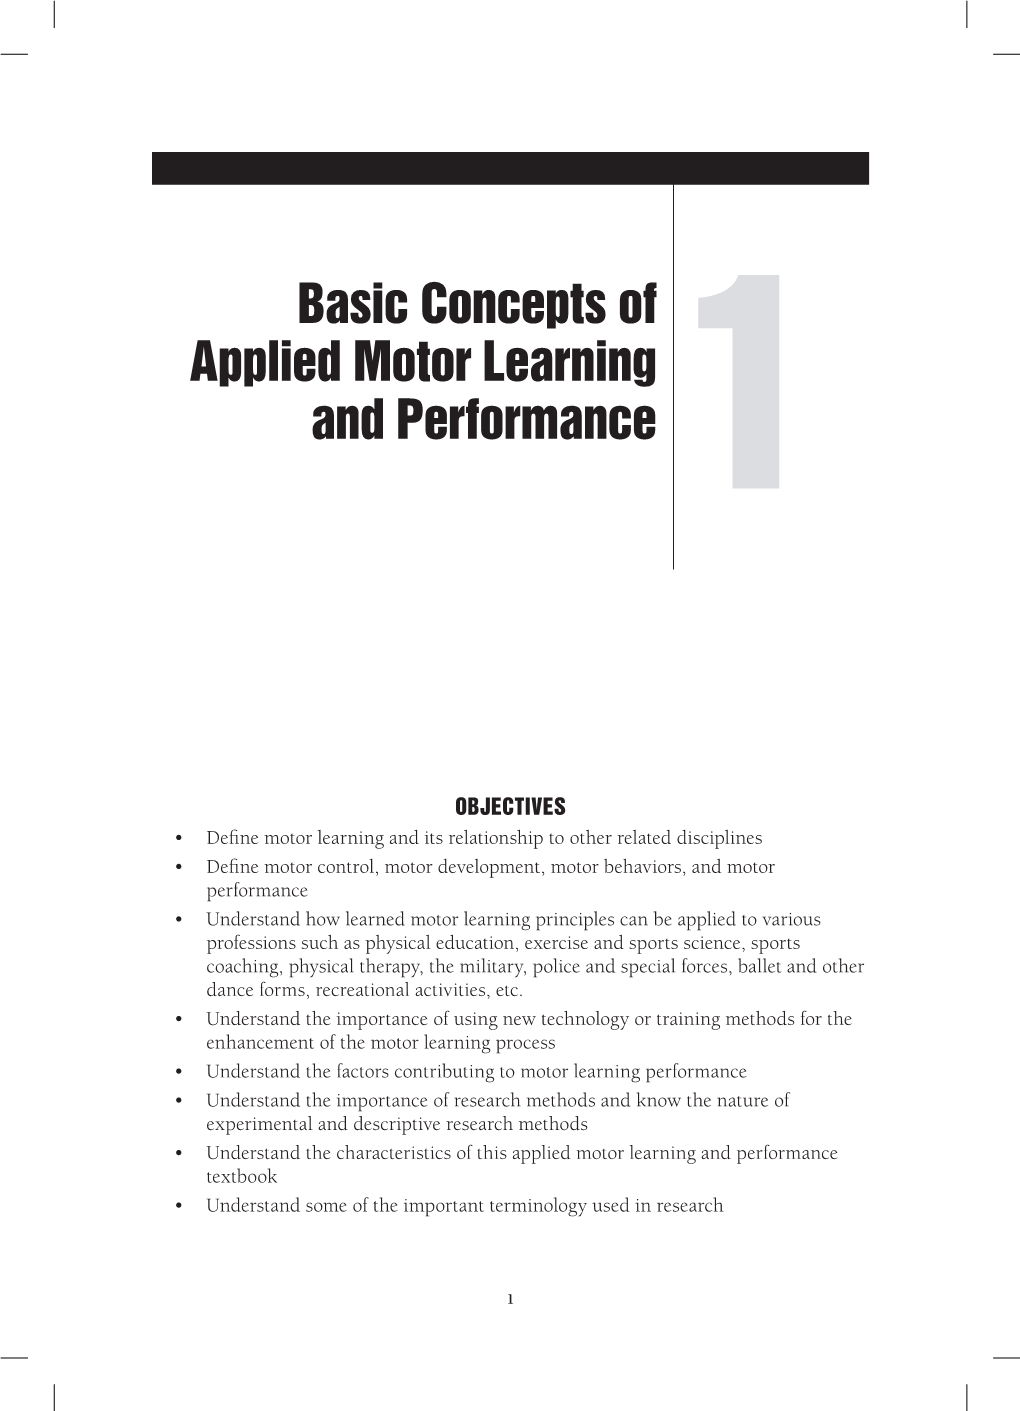 Basic Concepts of Applied Motor Learning and Performance 1